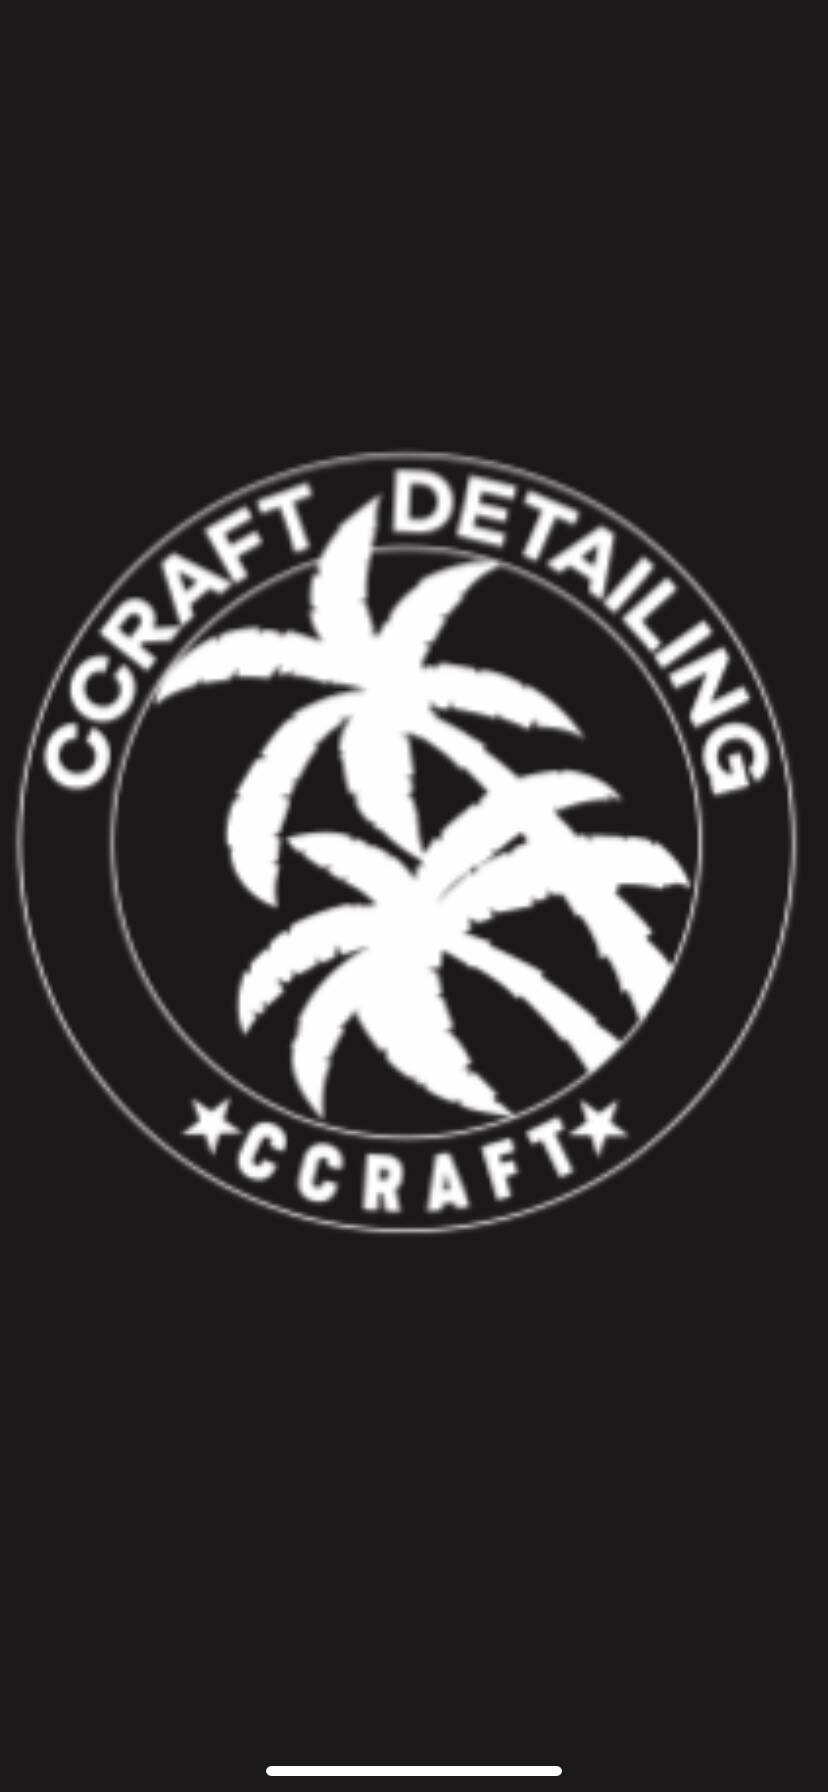 CCraft Holdings Limited